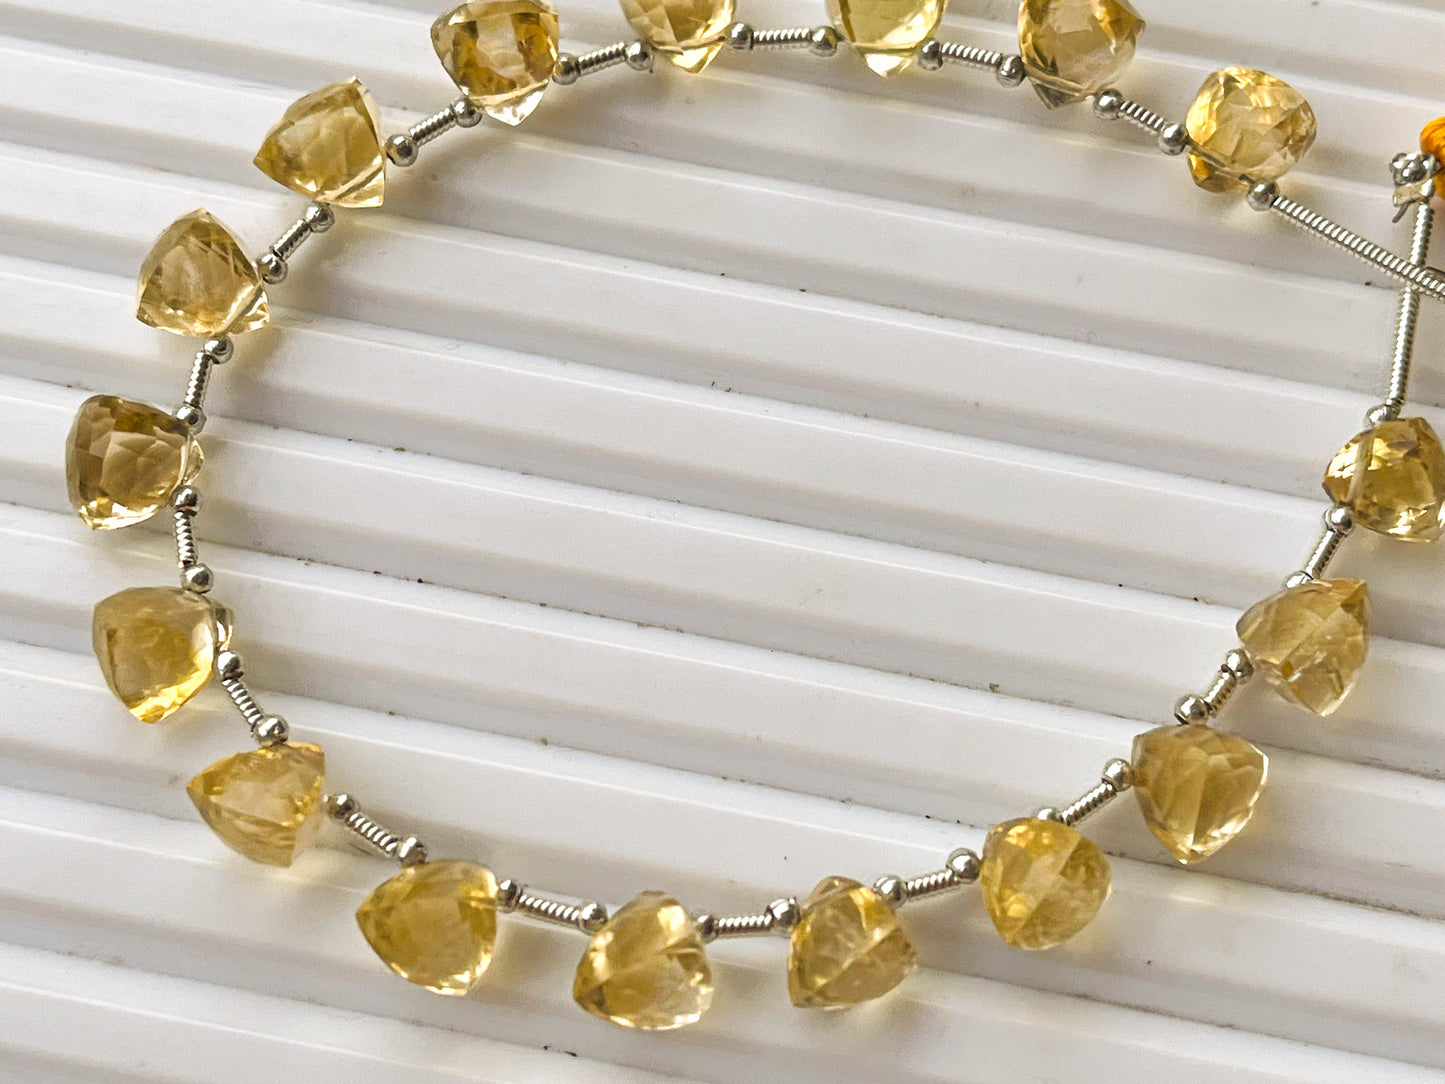 17 Pieces Citrine 3D Trillion Shape Beads Beadsforyourjewelry